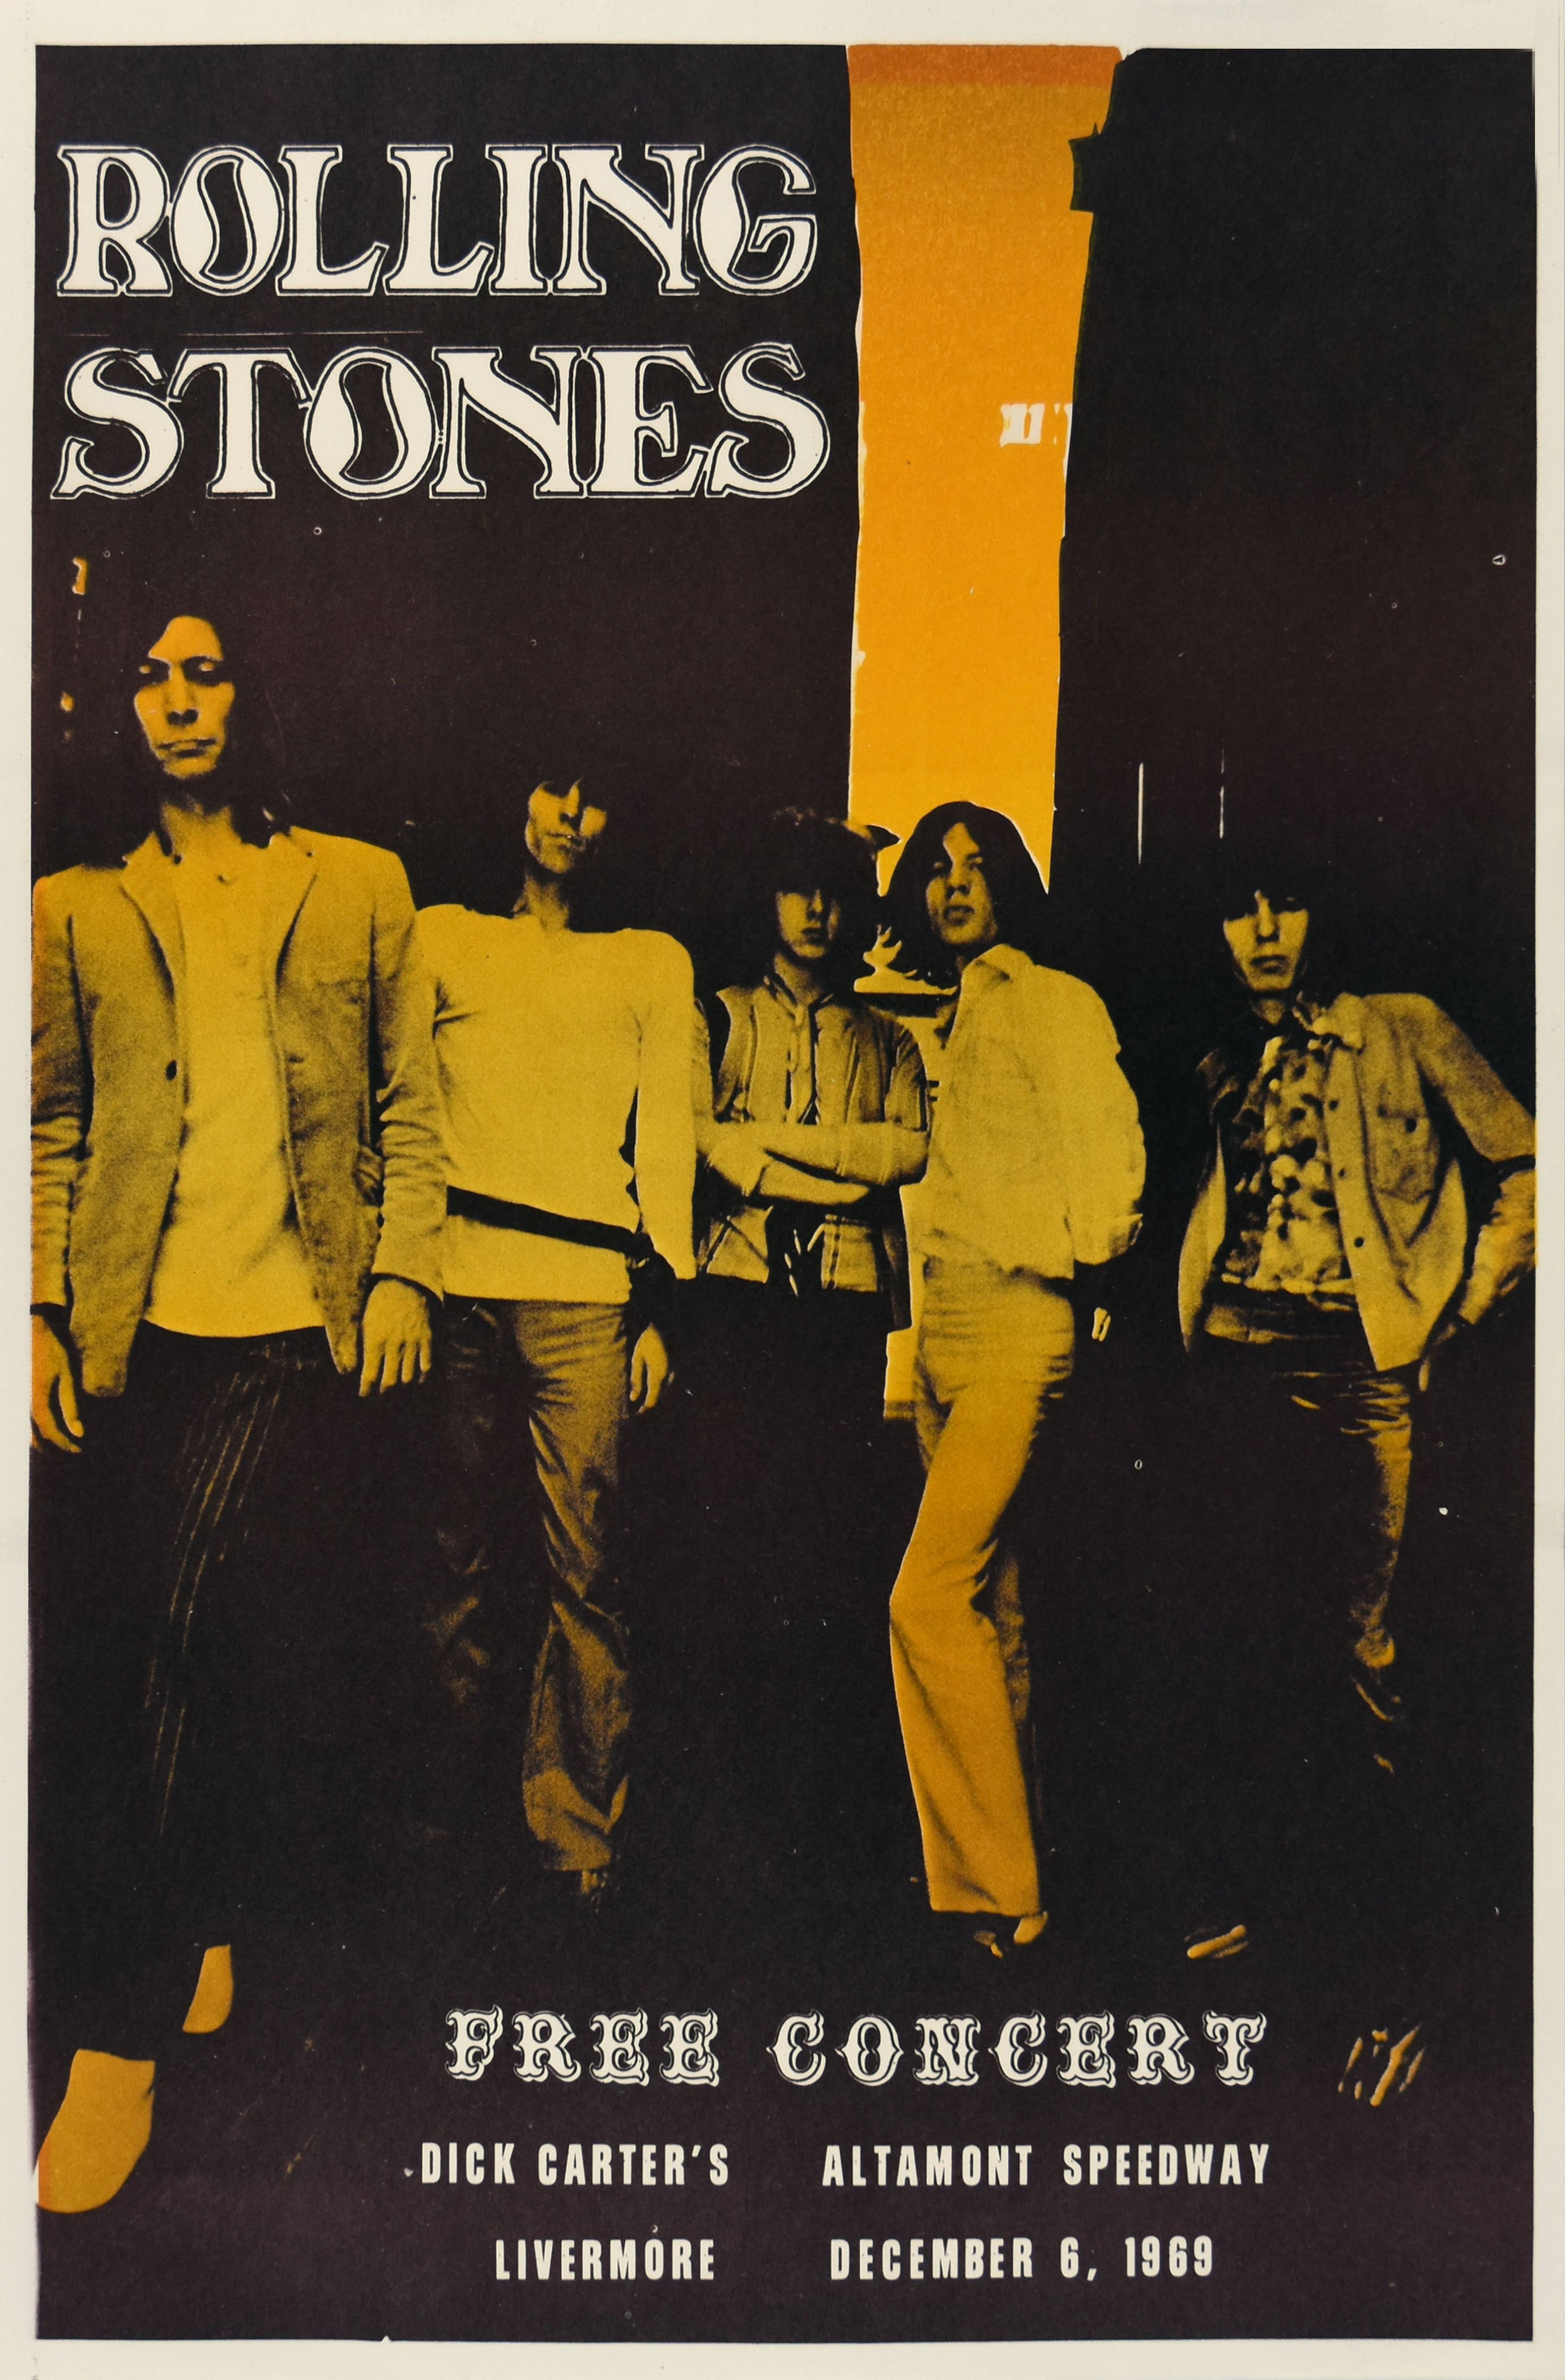 The Rolling Stones Altamont Speedway 1969 Concert Poster